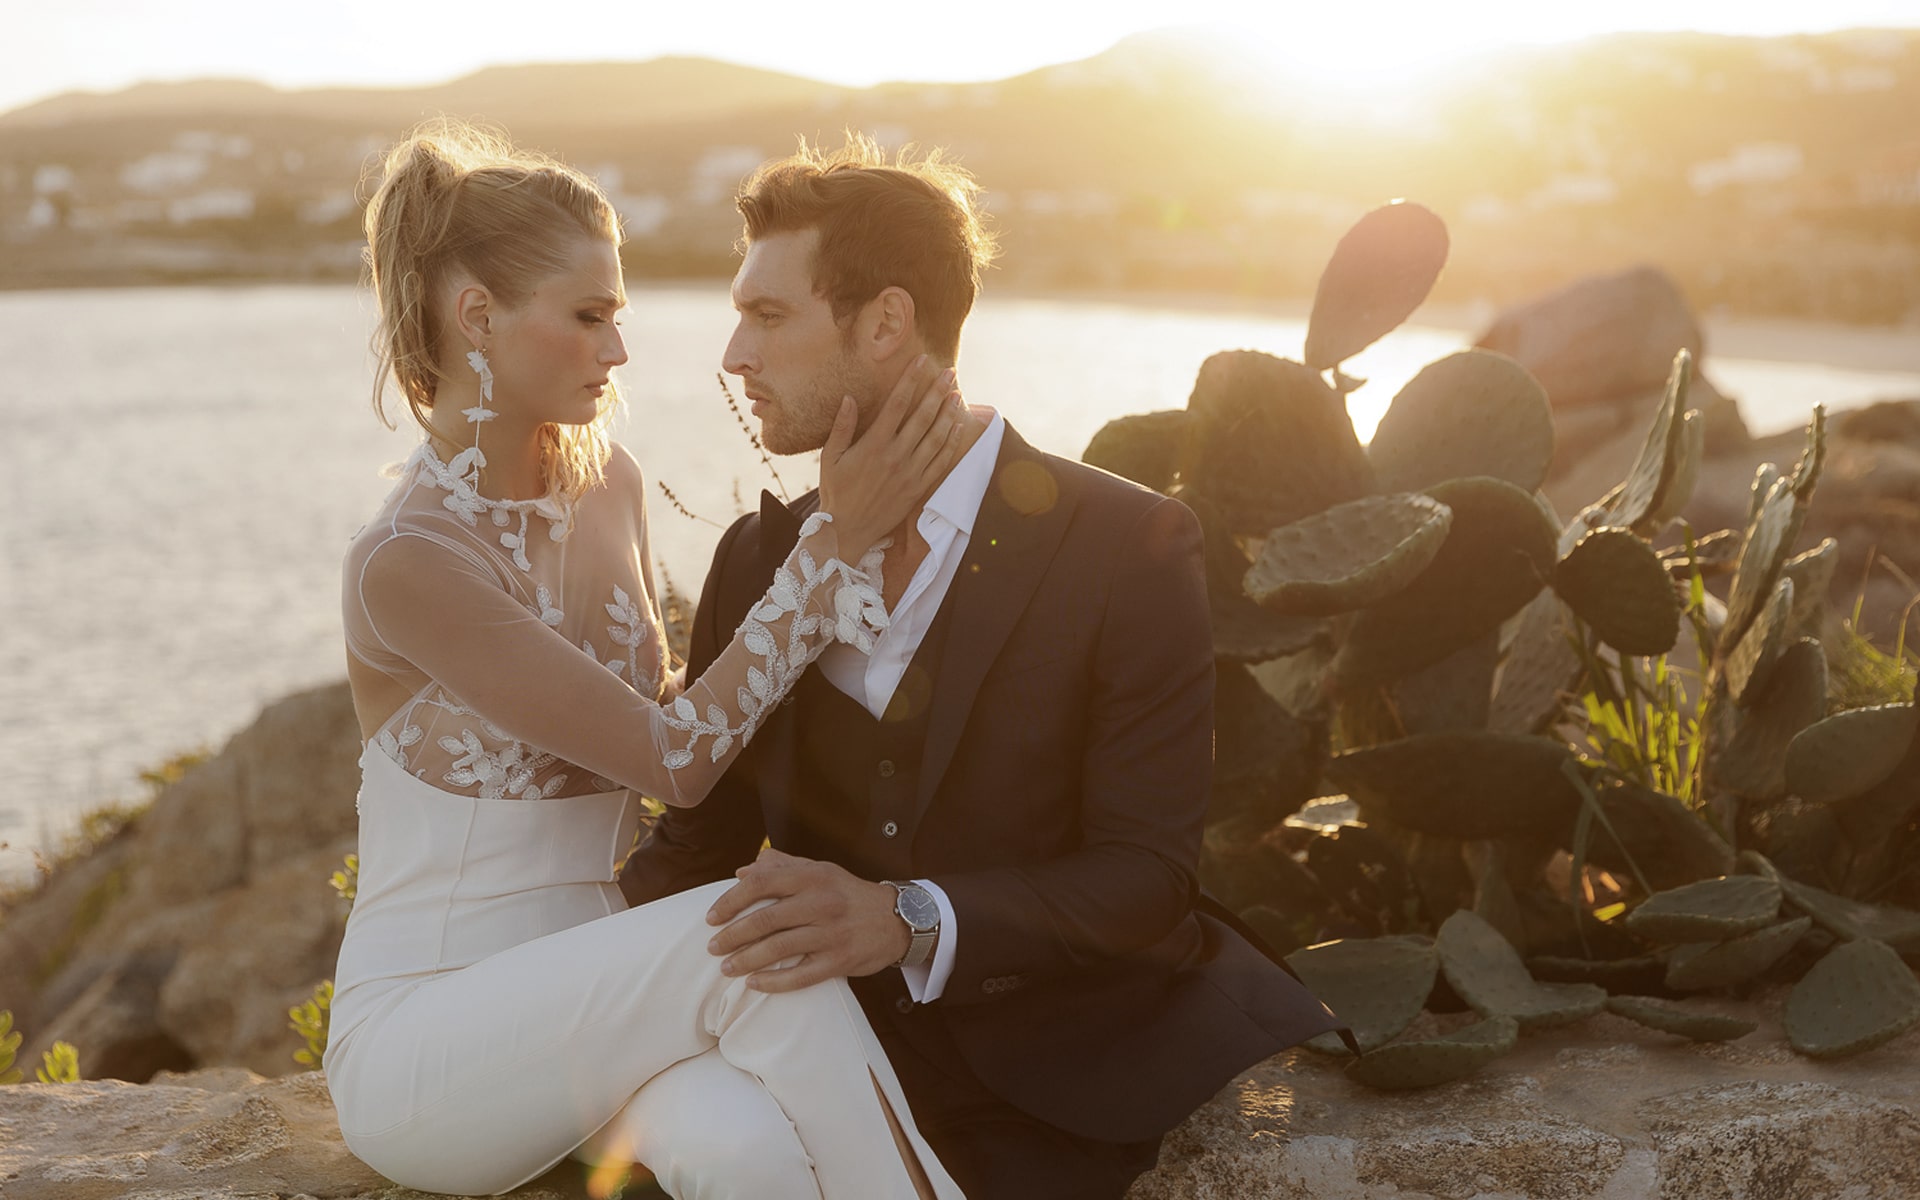 Cali weddings - couple in love with Mykonos at sunset as a backdrop